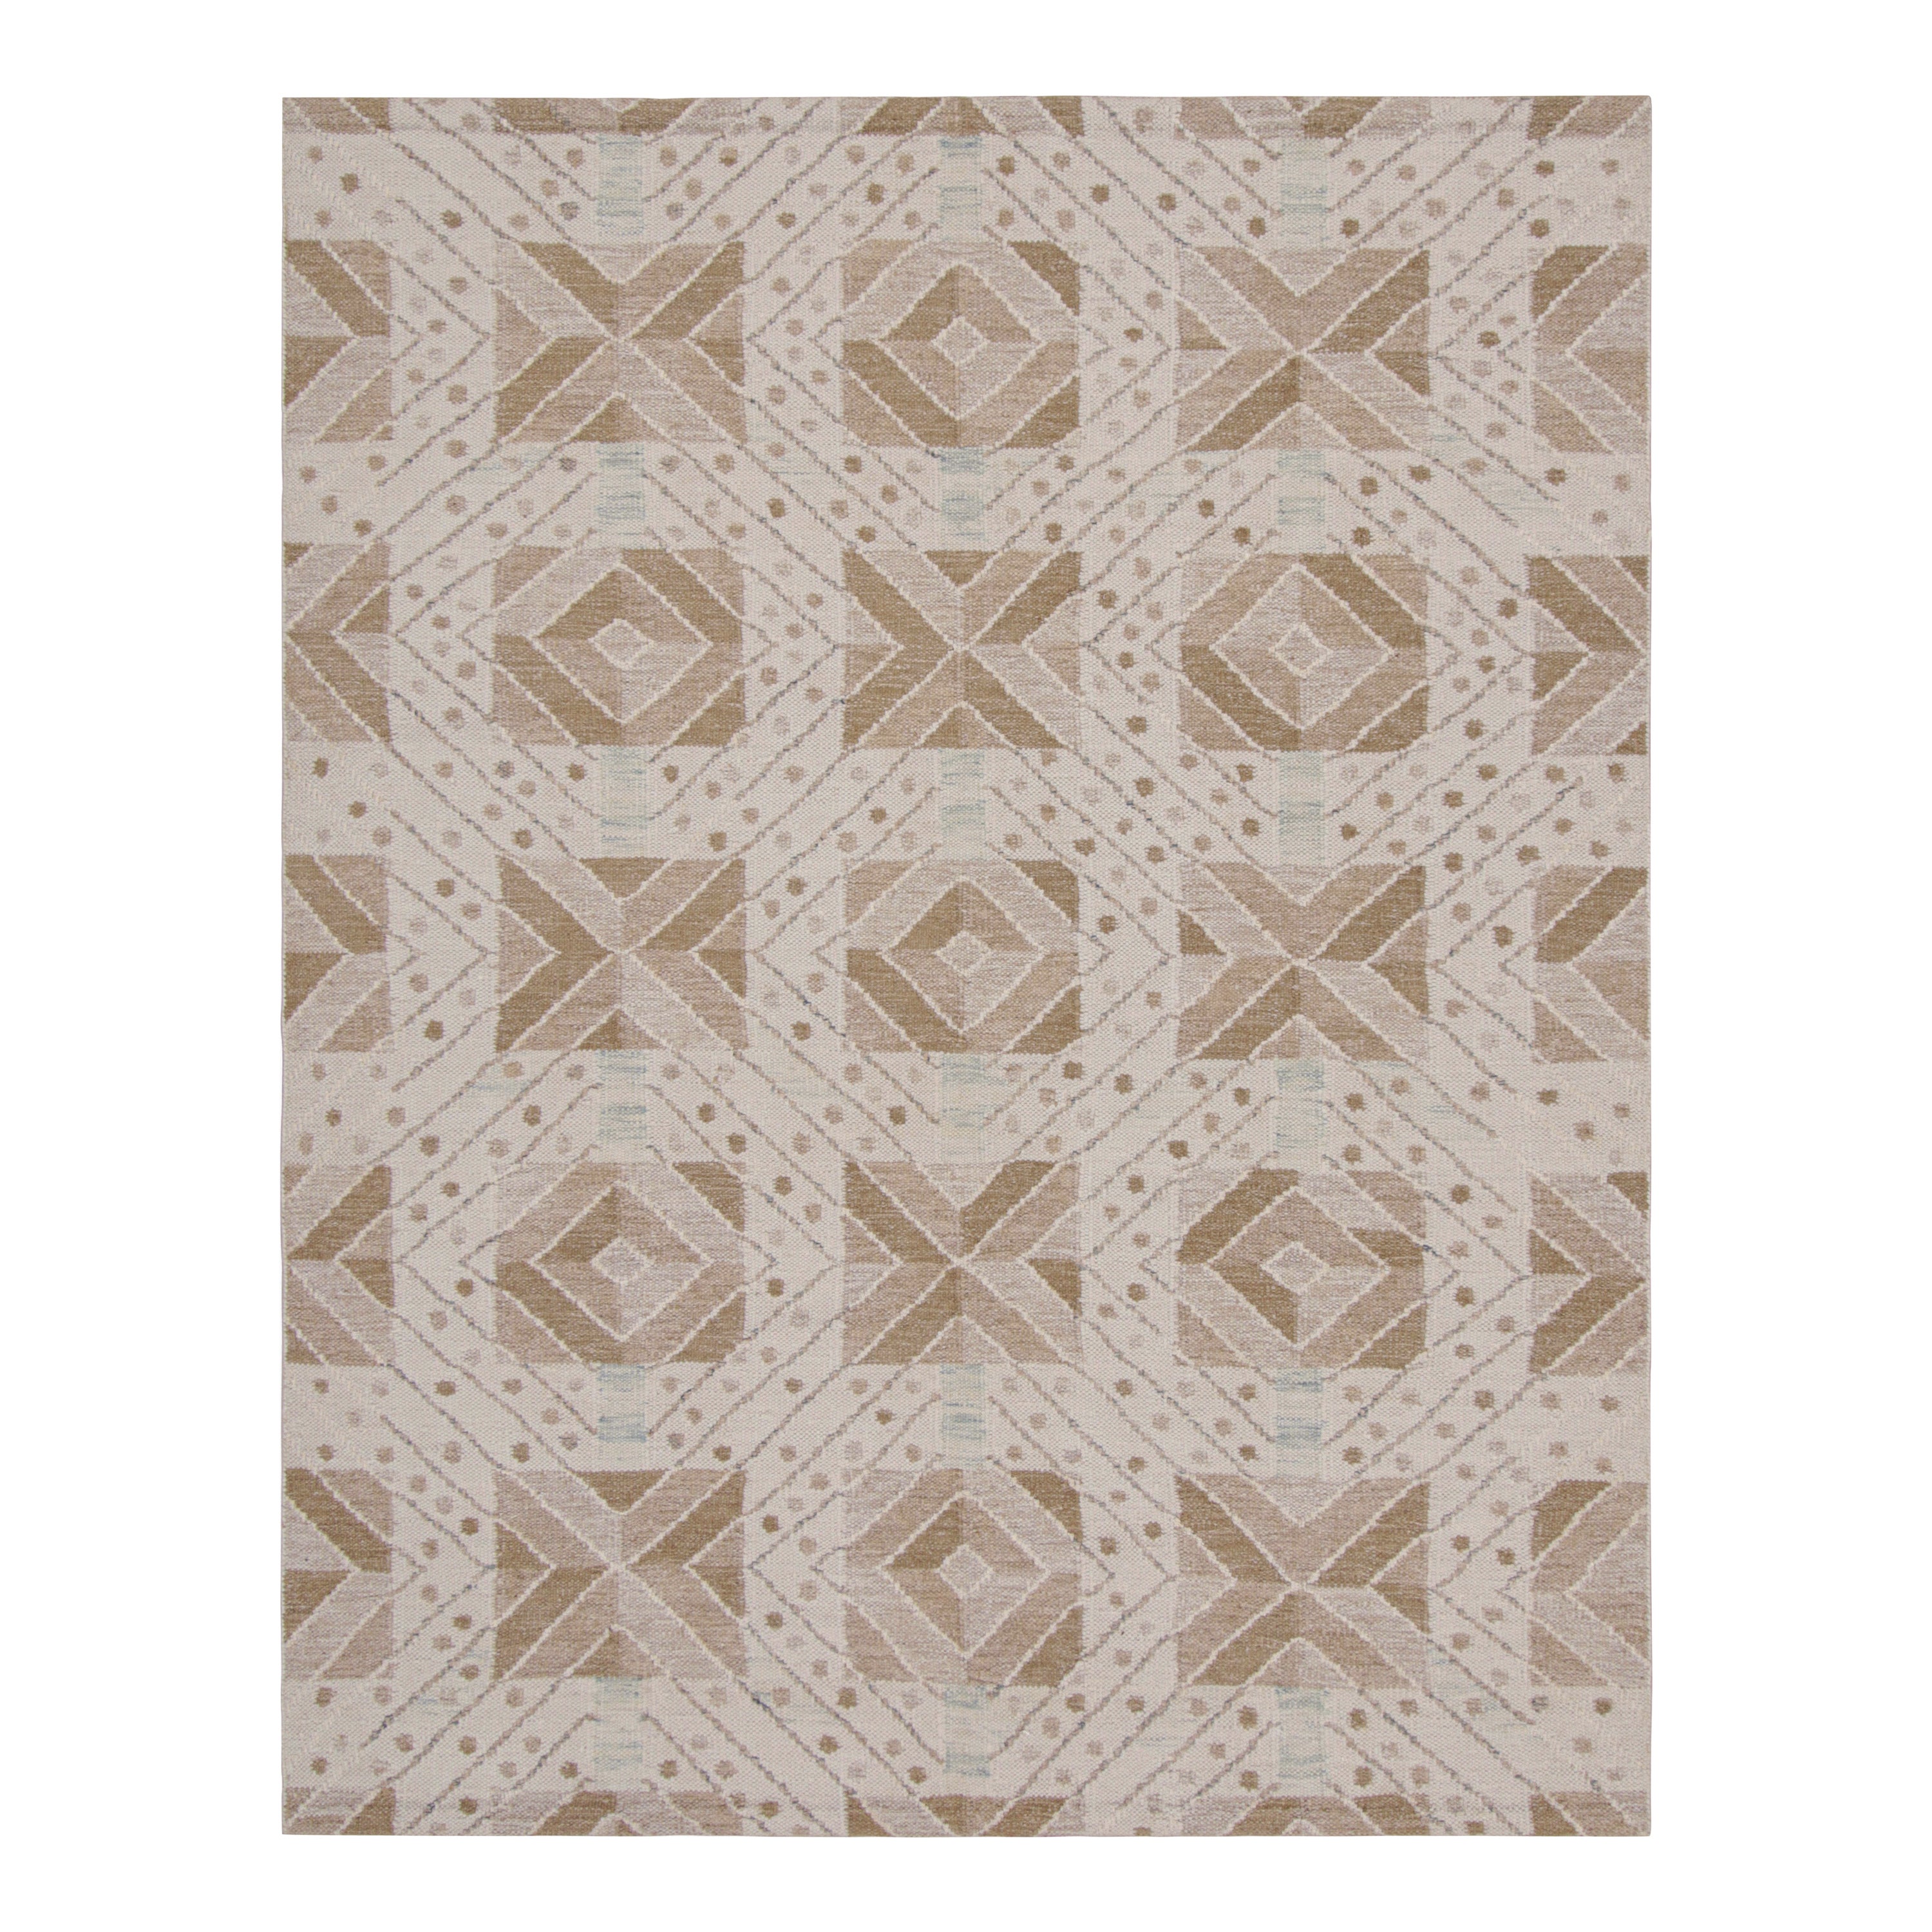 Rug & Kilim’s Scandinavian Style Rug with Beige-Brown Geometric Patterns For Sale